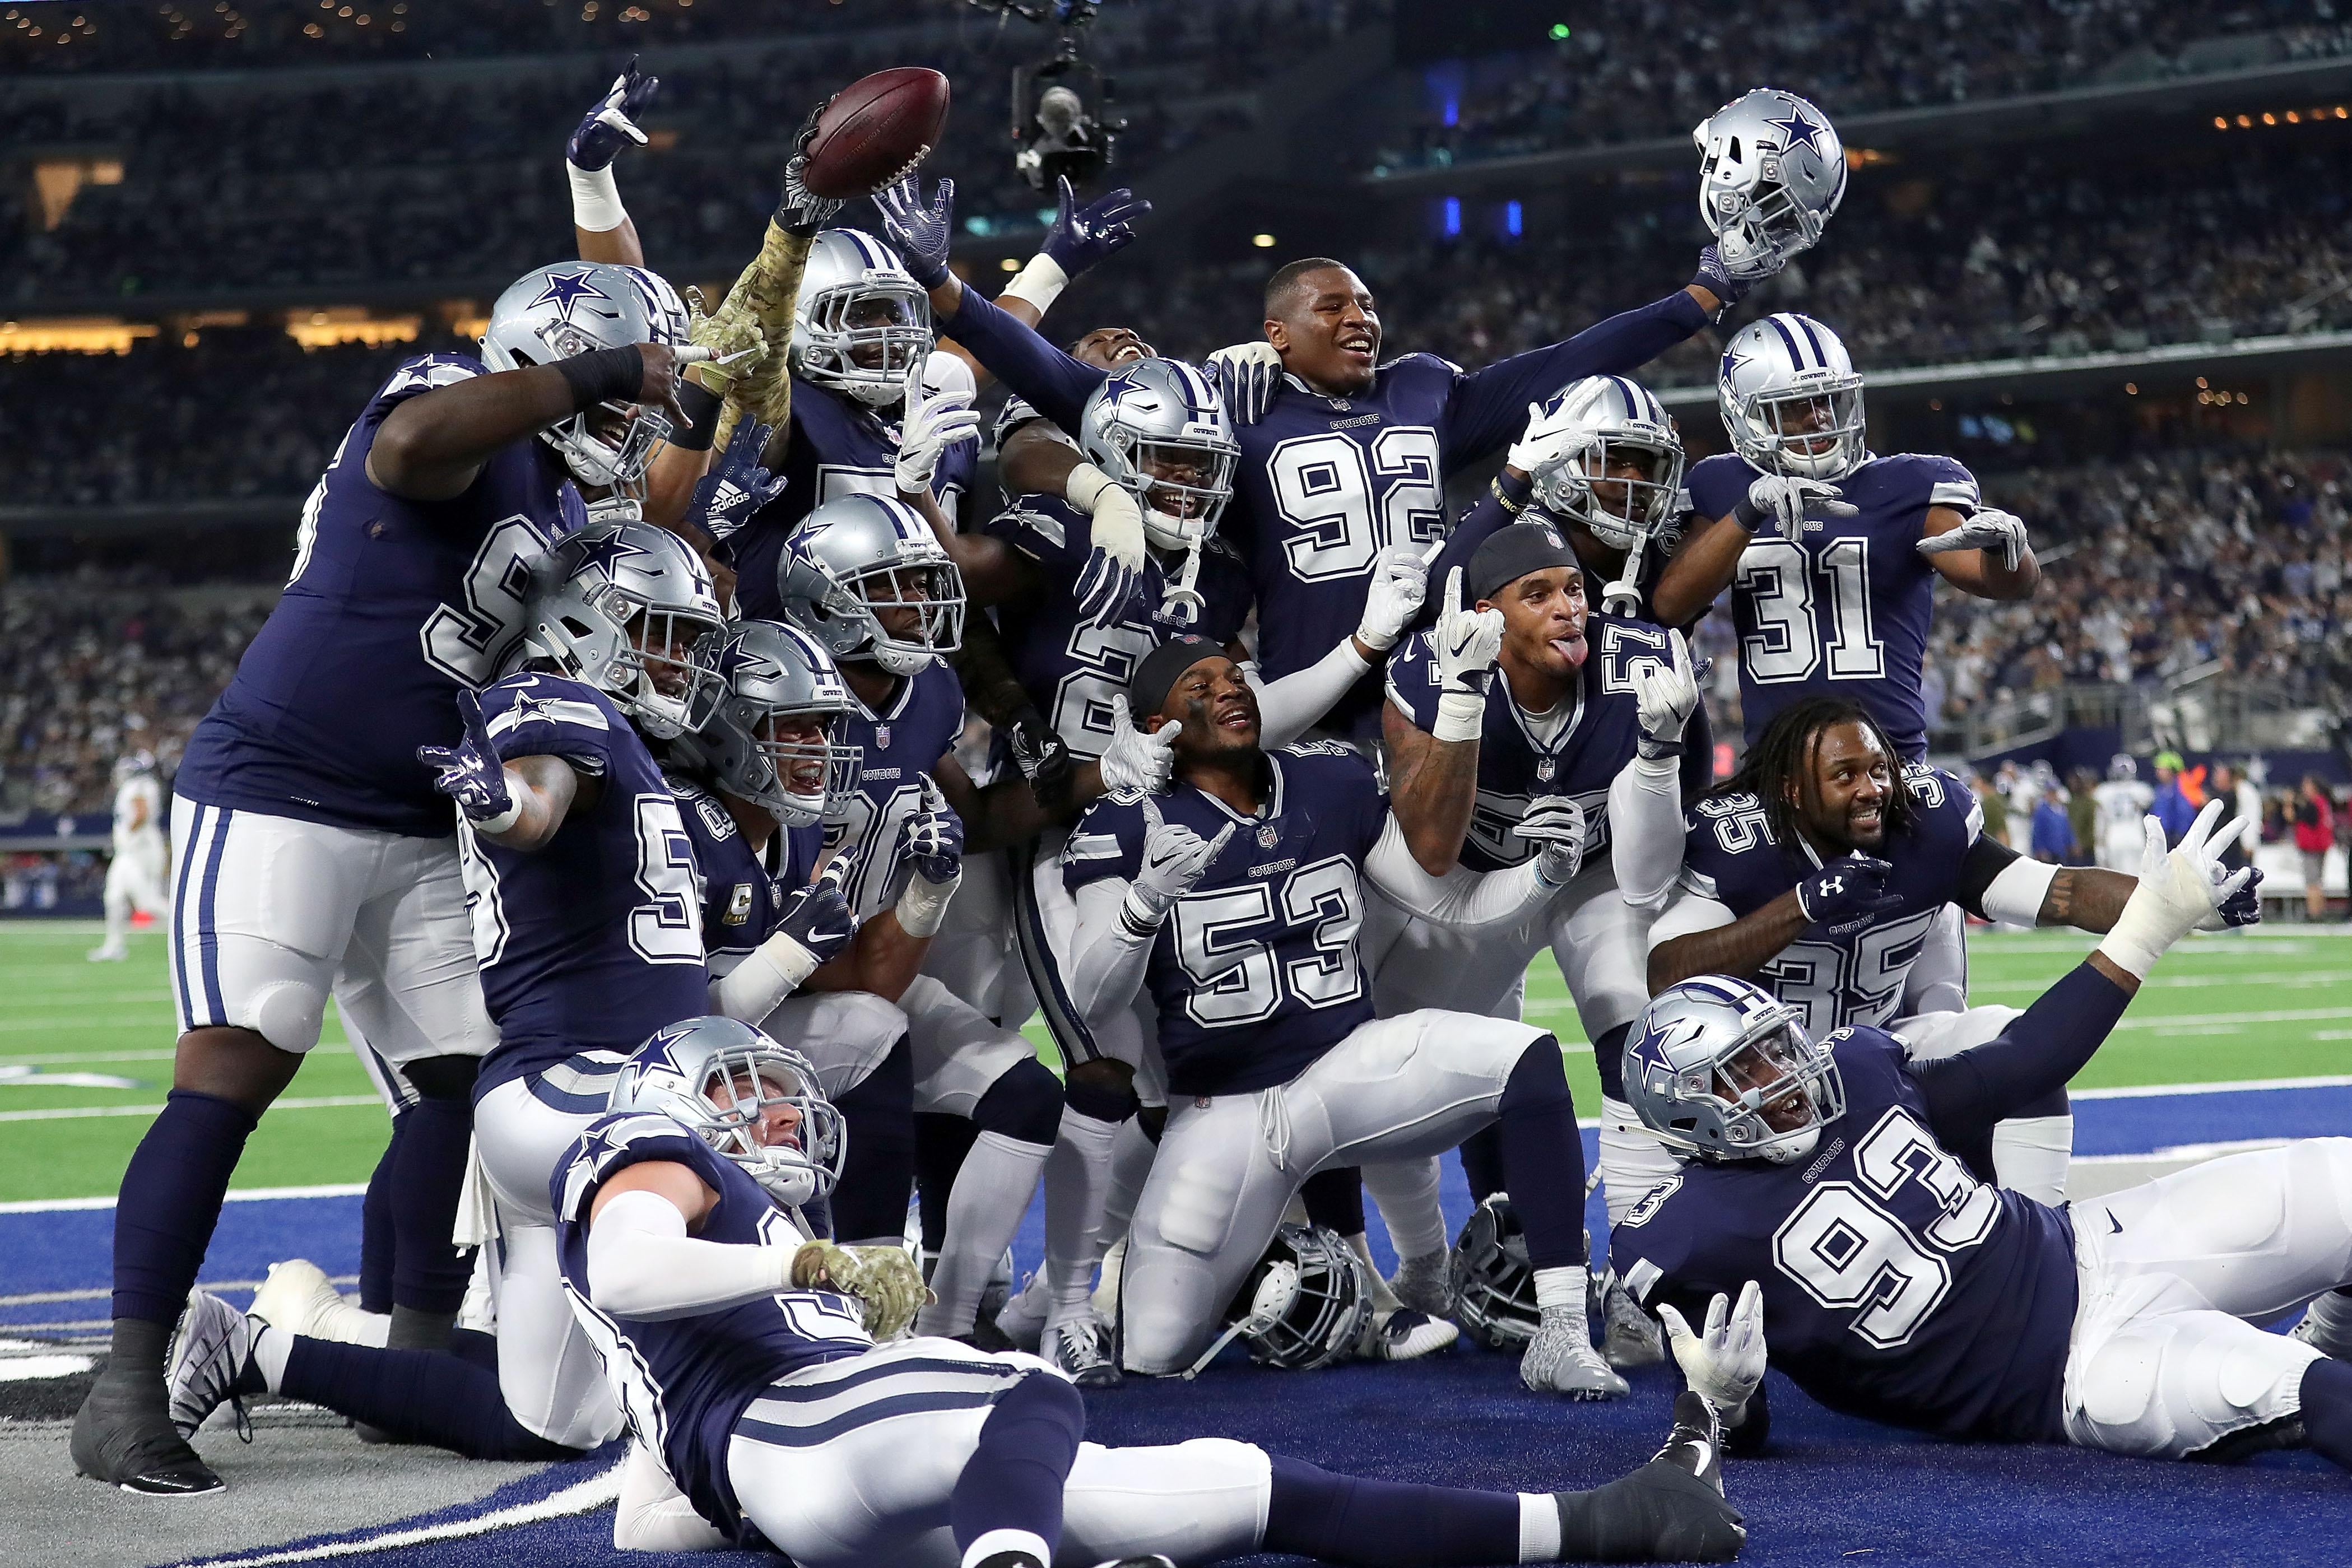 ARLINGTON, TX - NOVEMBER 05:  The Dallas Cowboys defensive line poses for a photo in the end zone after a fumble recovery against the Tennessee Titans in the first quarter of a football game at AT&T Stadium on November 5, 2018 in Arlington, Texas. (Photo by Tom Pennington/Getty Images)